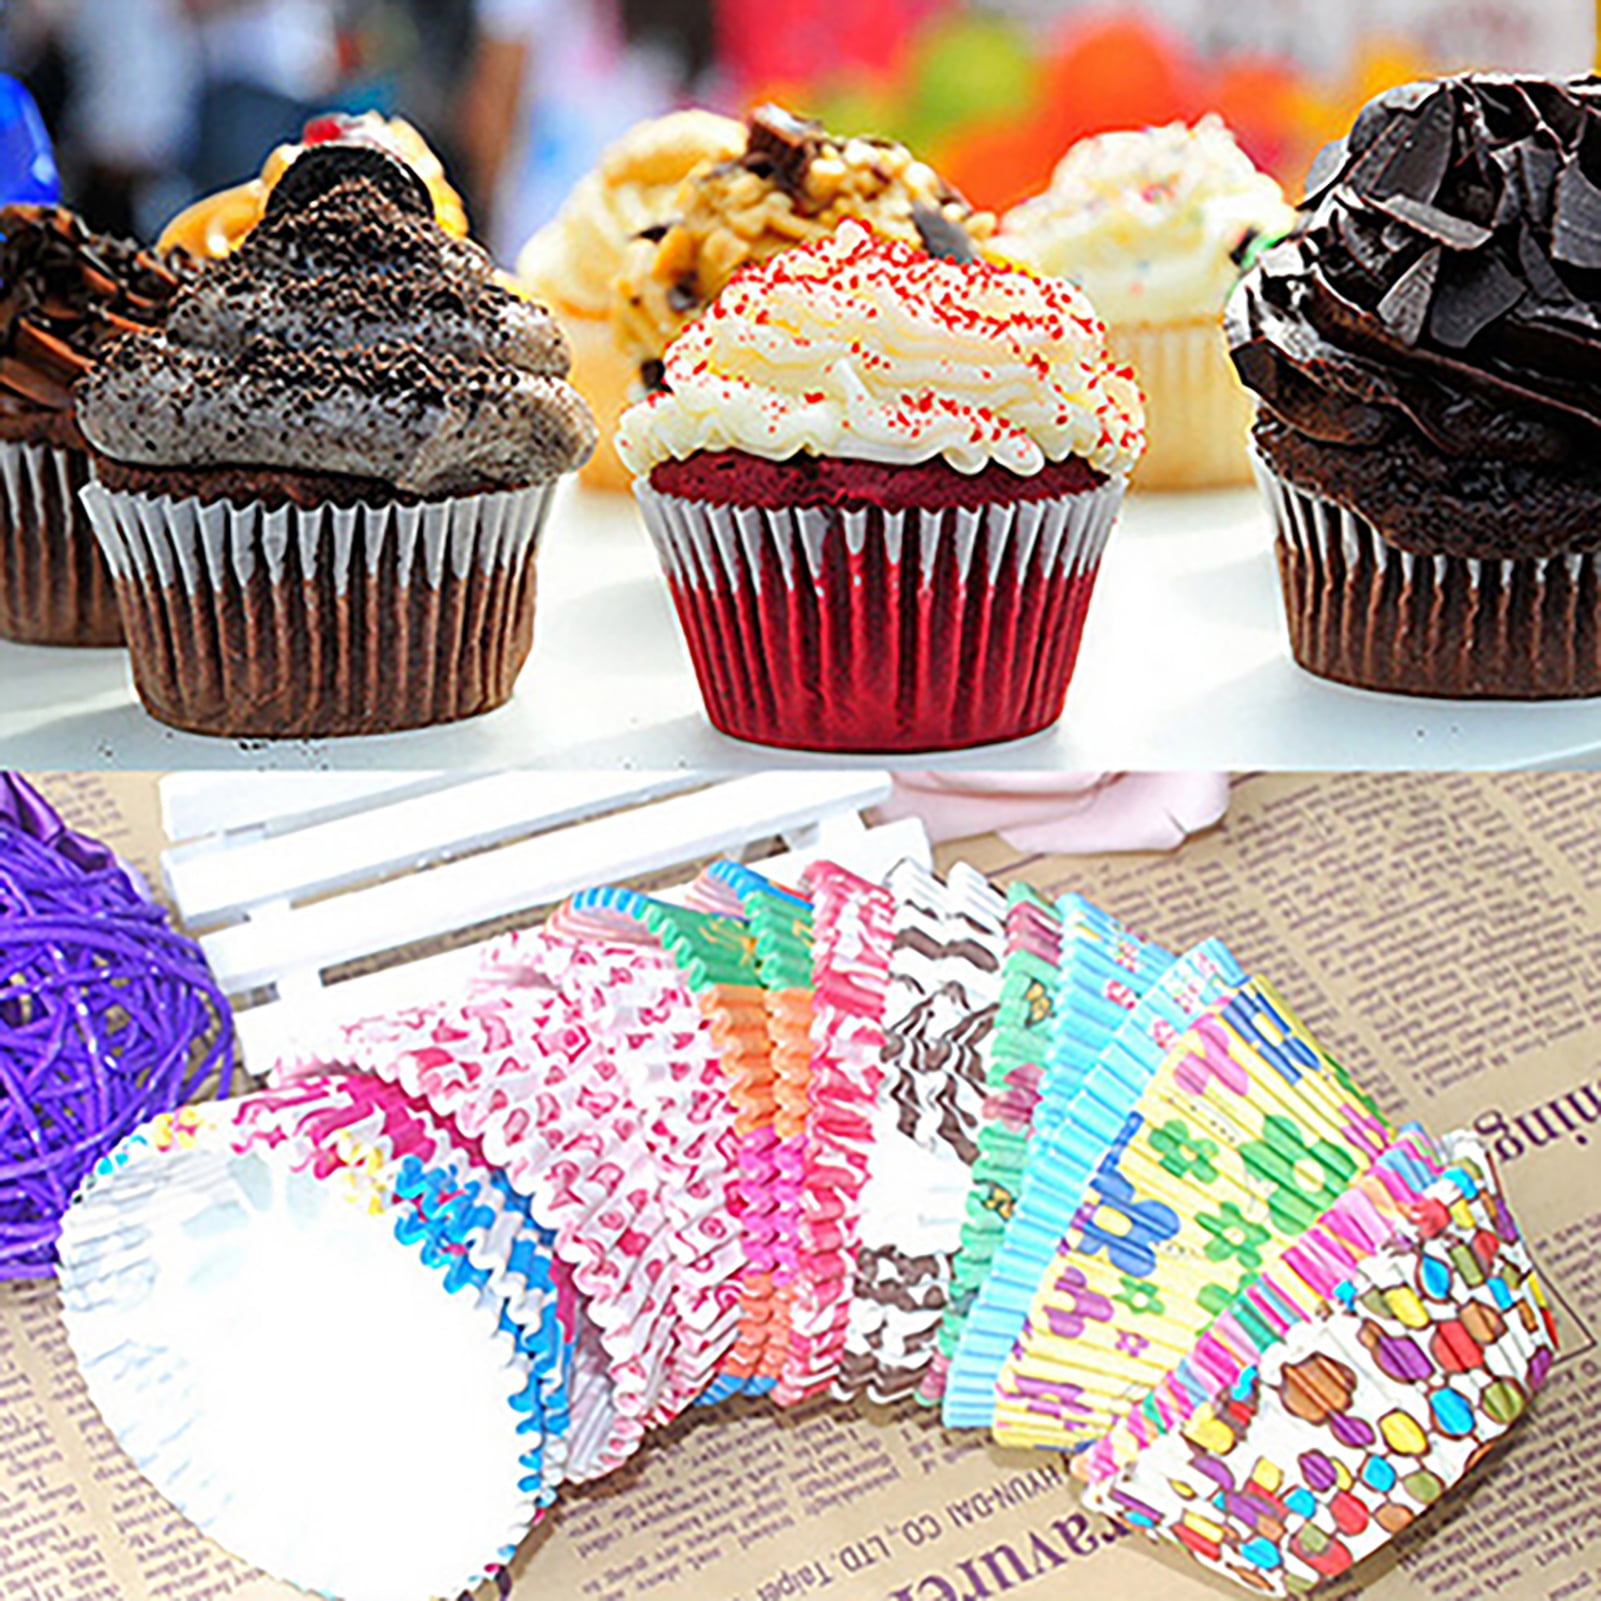 300PCS Thickened Aluminum Foil Cups Cupcake Liners Cake Muffin